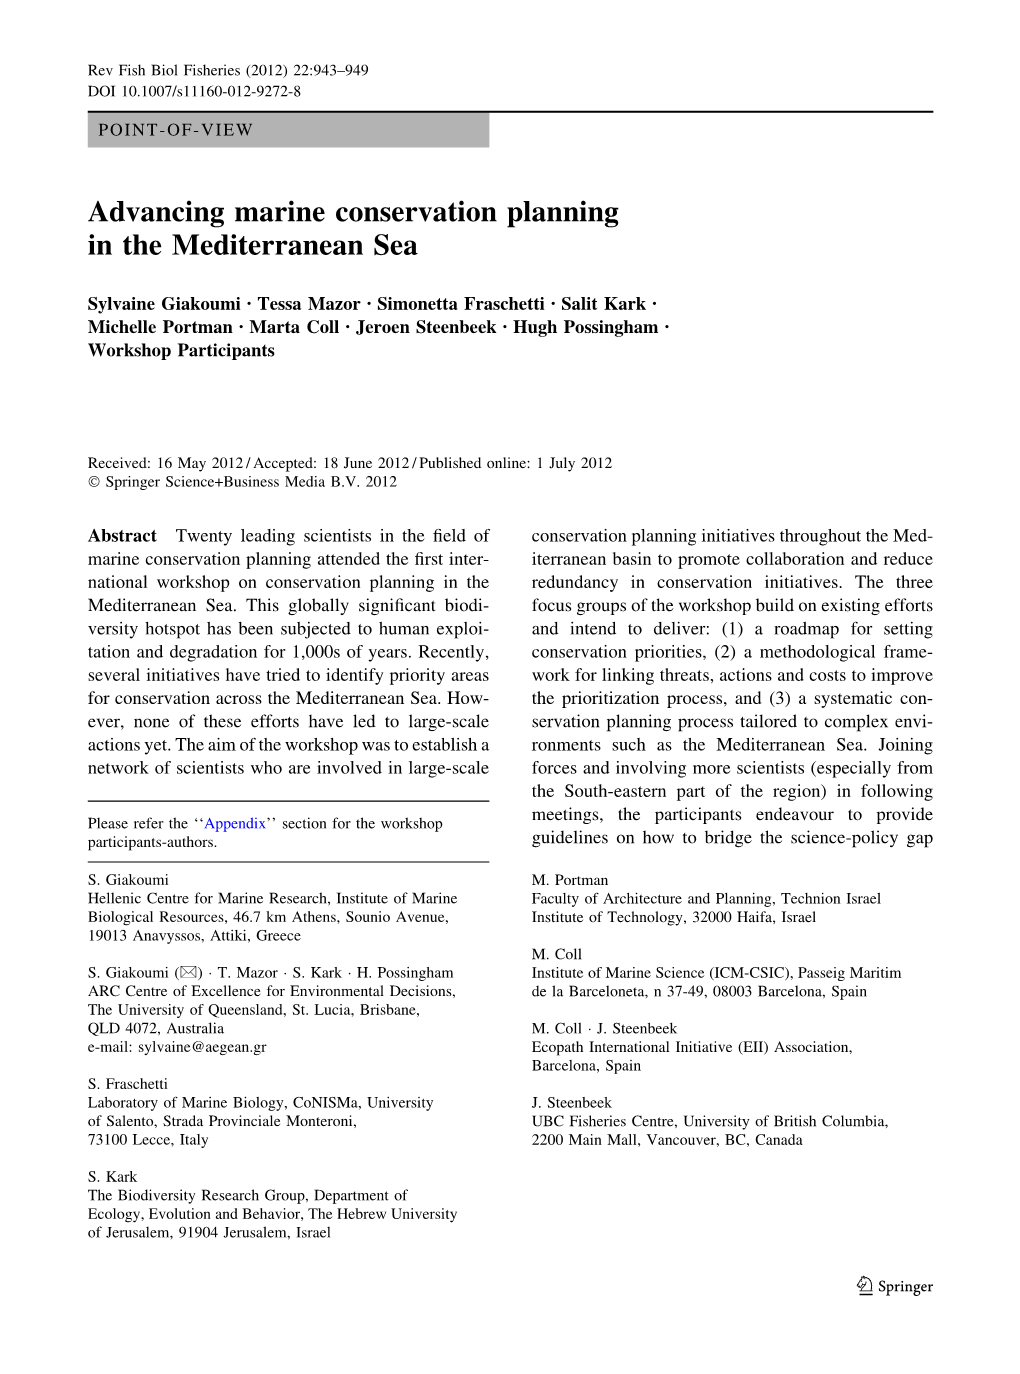 Advancing Marine Conservation Planning in the Mediterranean Sea